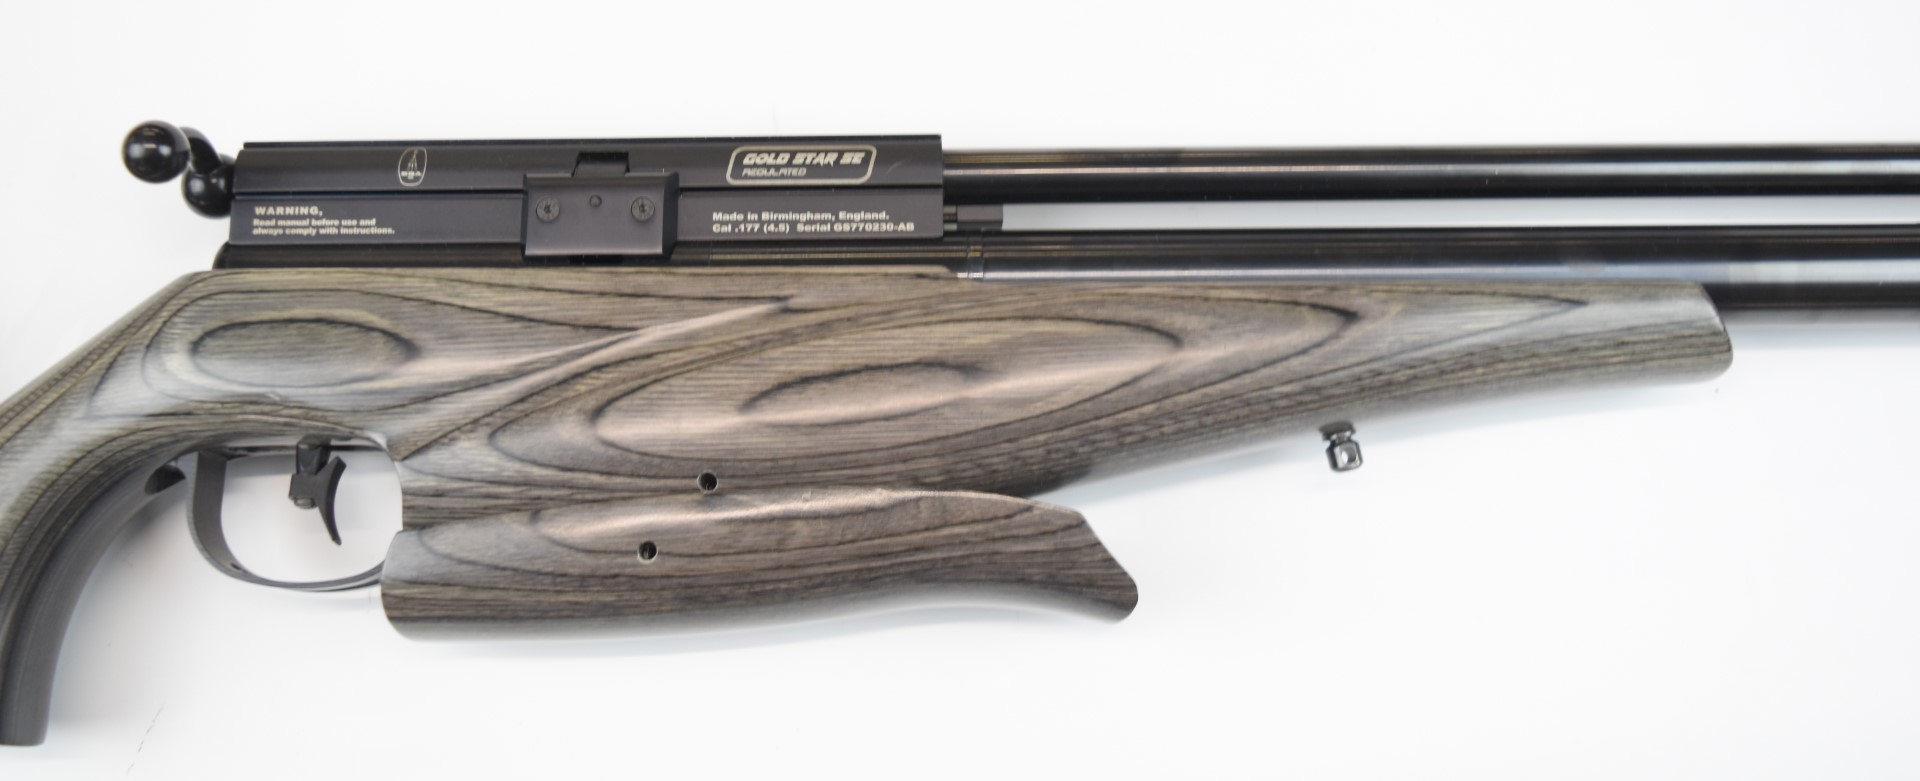 BSA Gold Star SE Regulated .177 PCP air rifle with show wood stock, semi-pistol grip, adjustable - Image 4 of 20